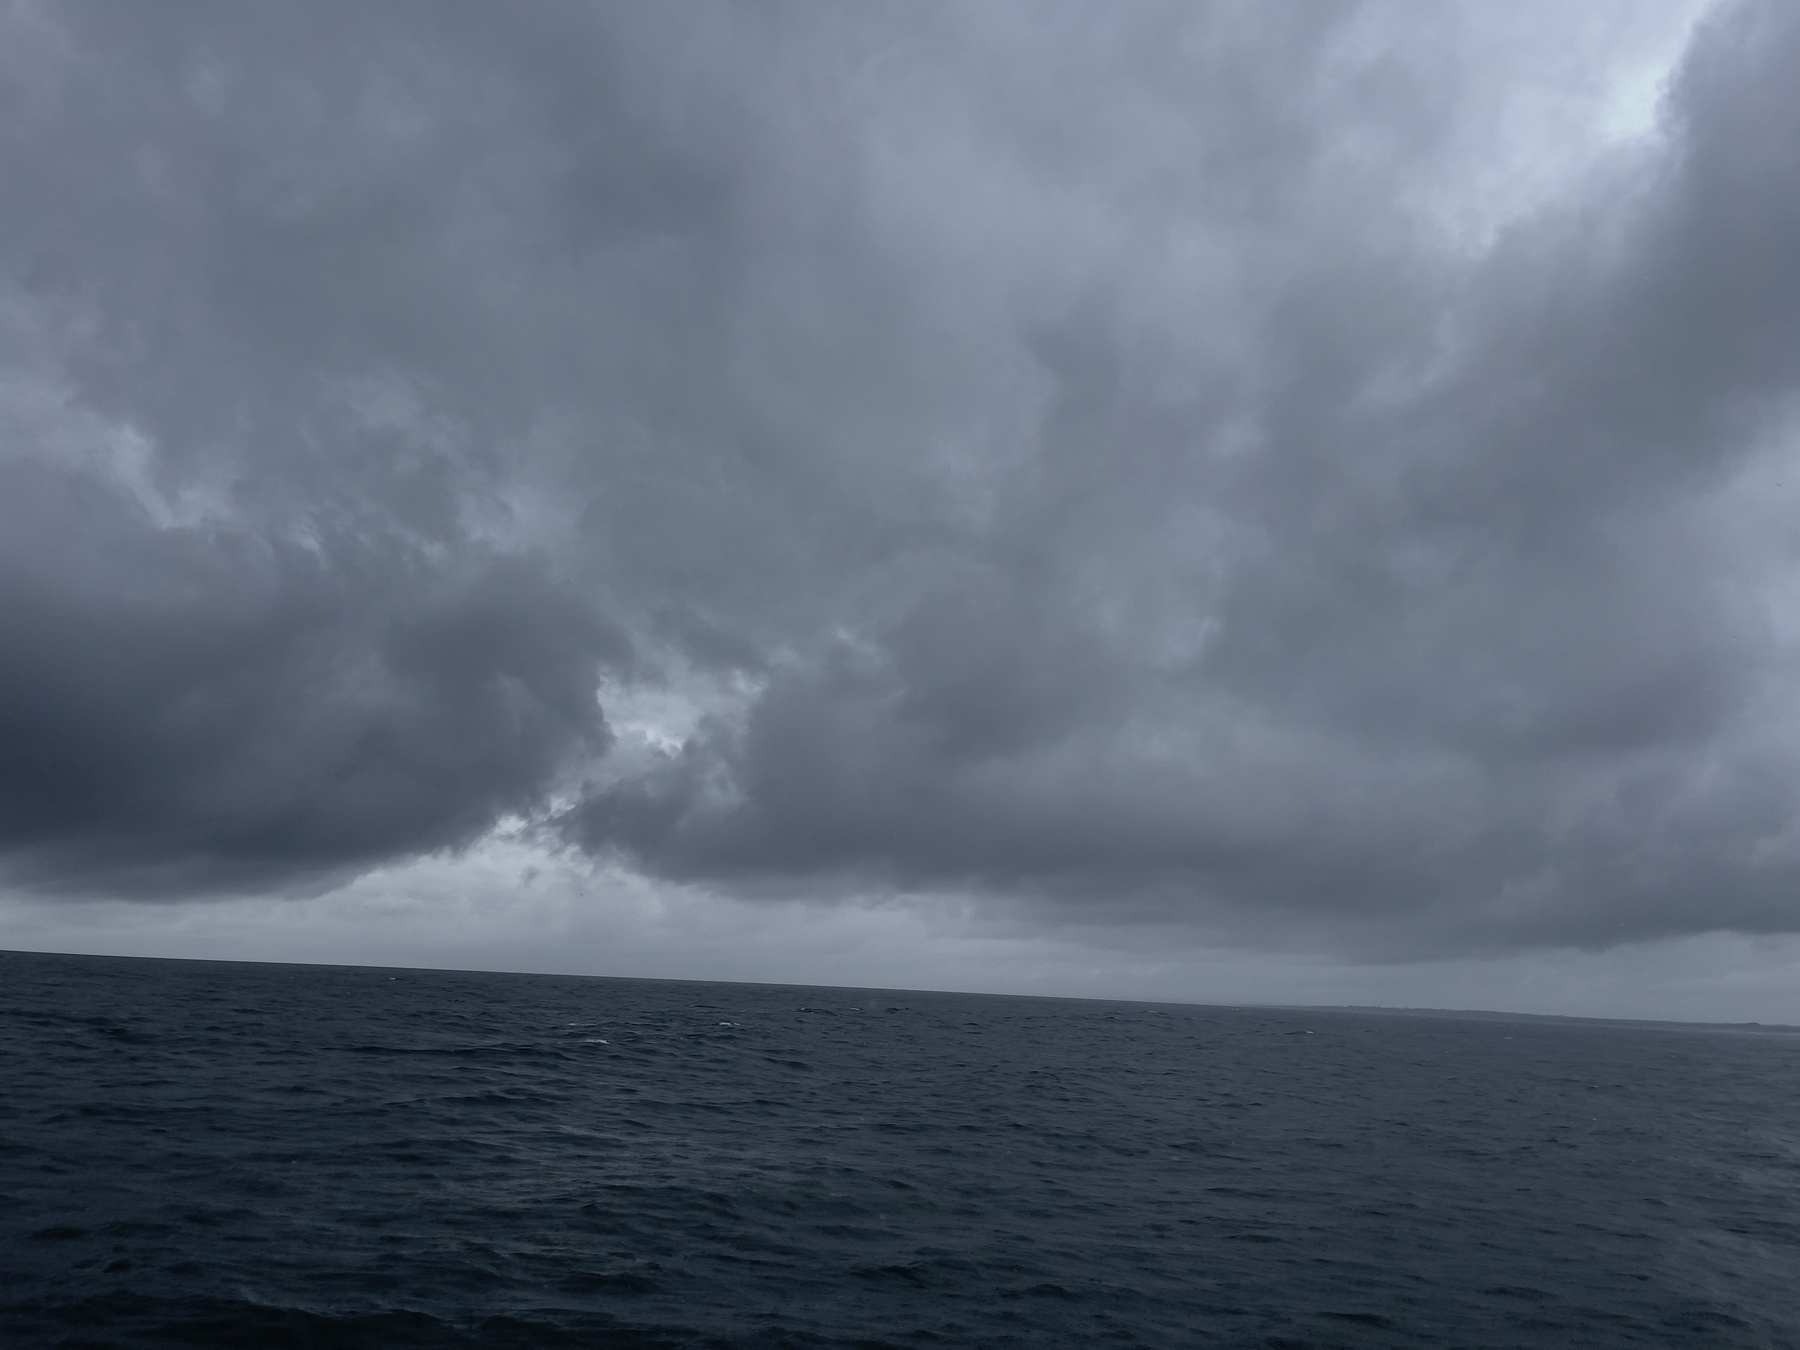 Ocean and storm clouds, horizon line tilted up to the left.